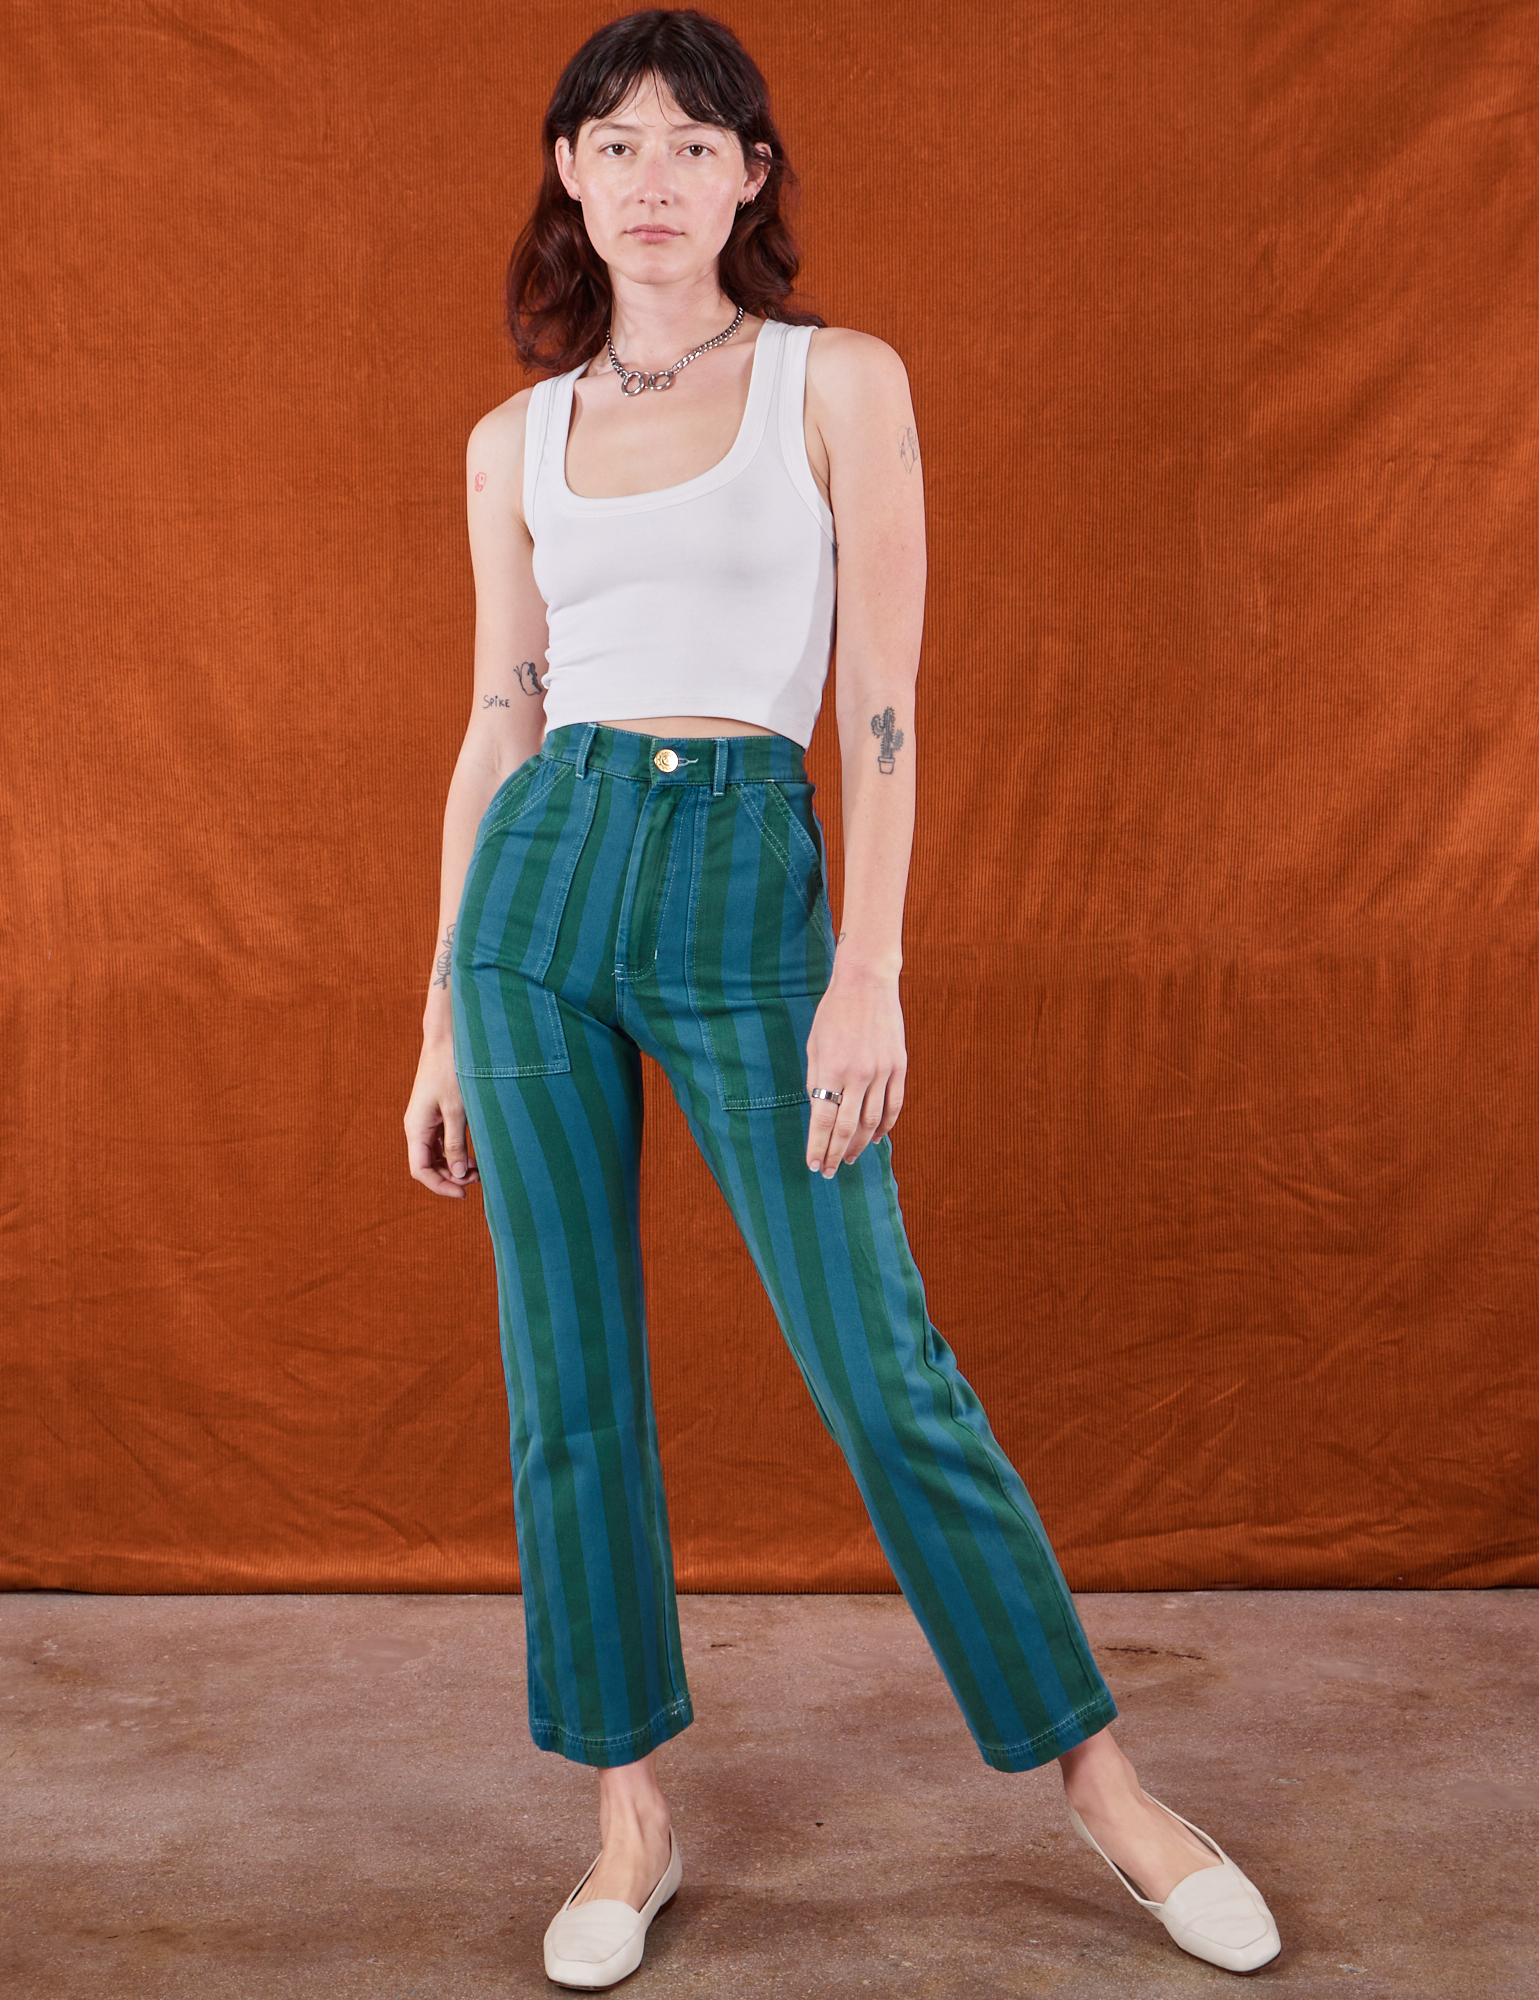 Alex is wearing Overdye Stripe Work Pants in Blue/Green and vintage off-white Cropped Tank Top